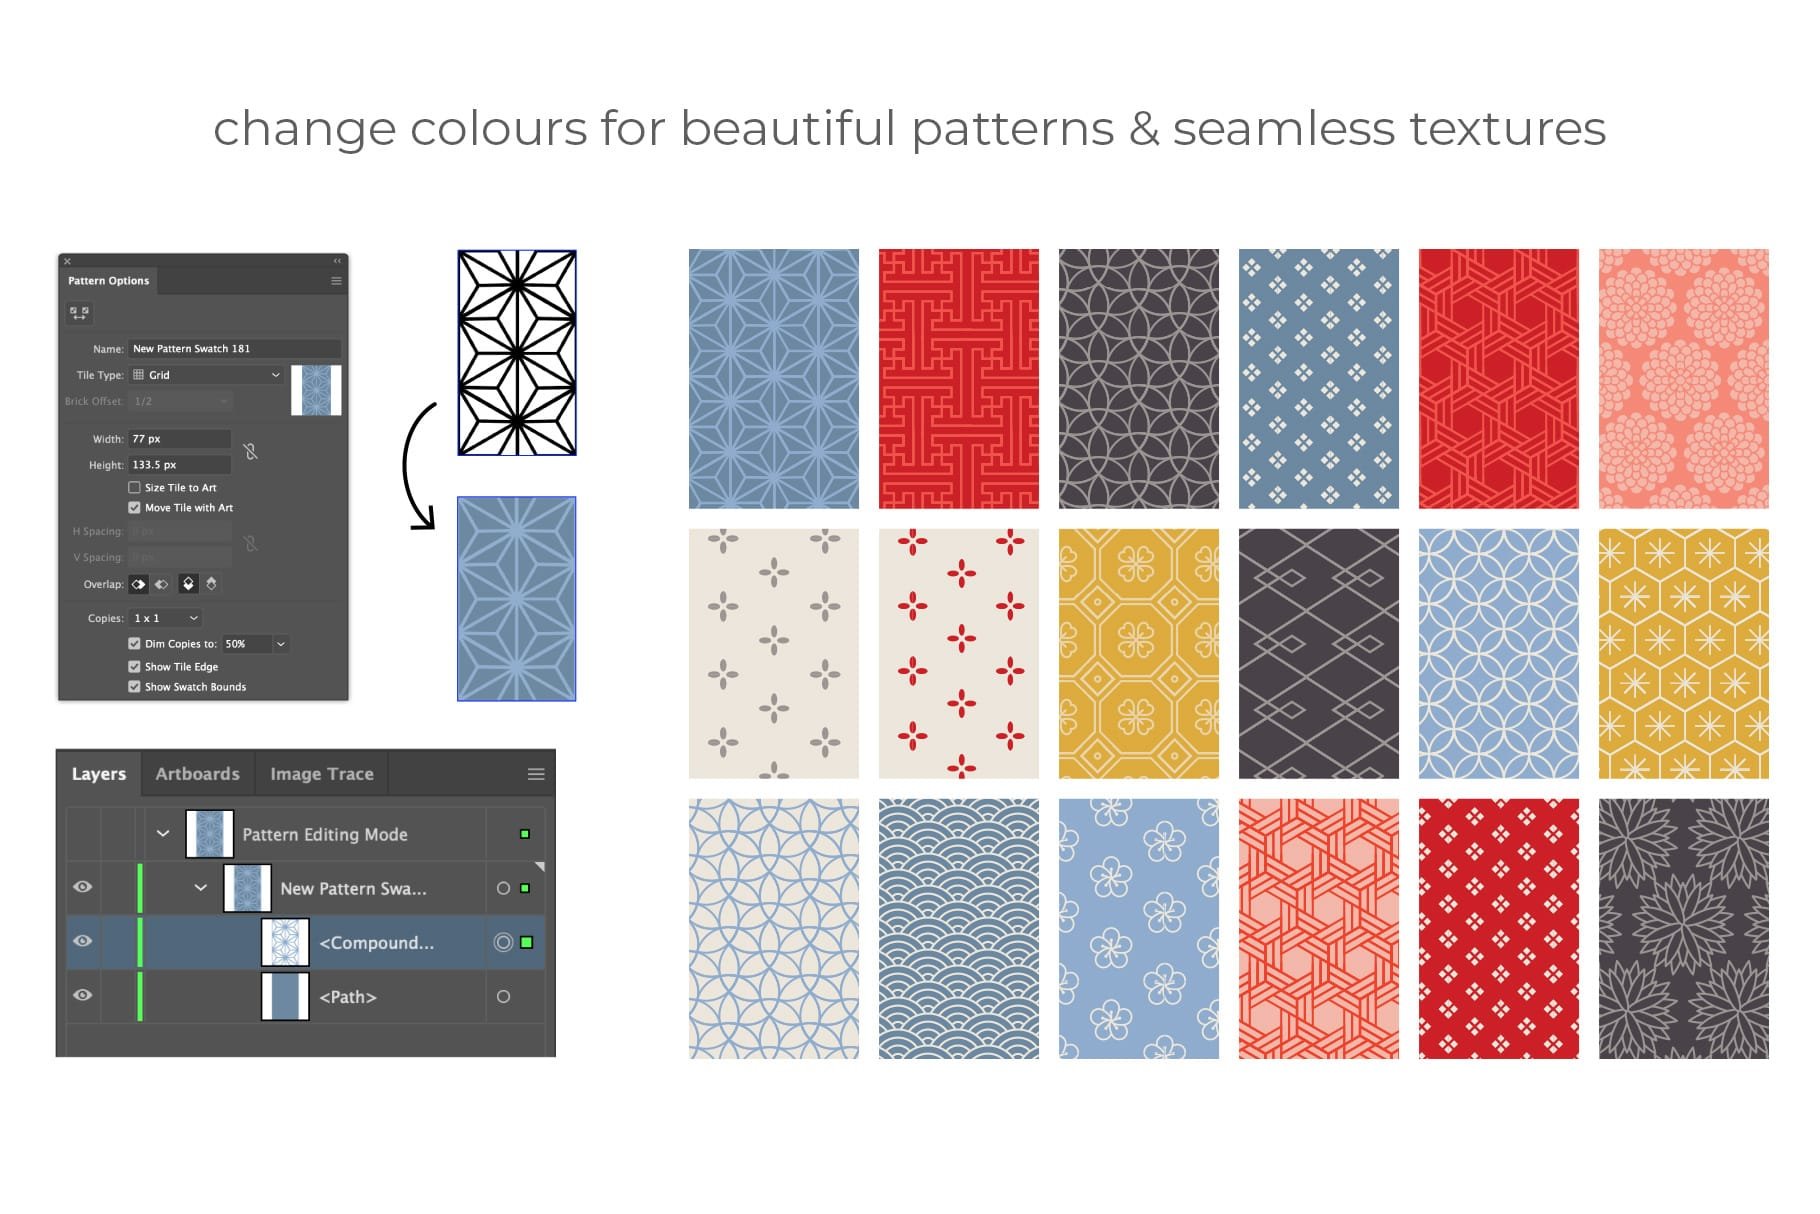 Change colors for beautiful patterns & seamless textures.